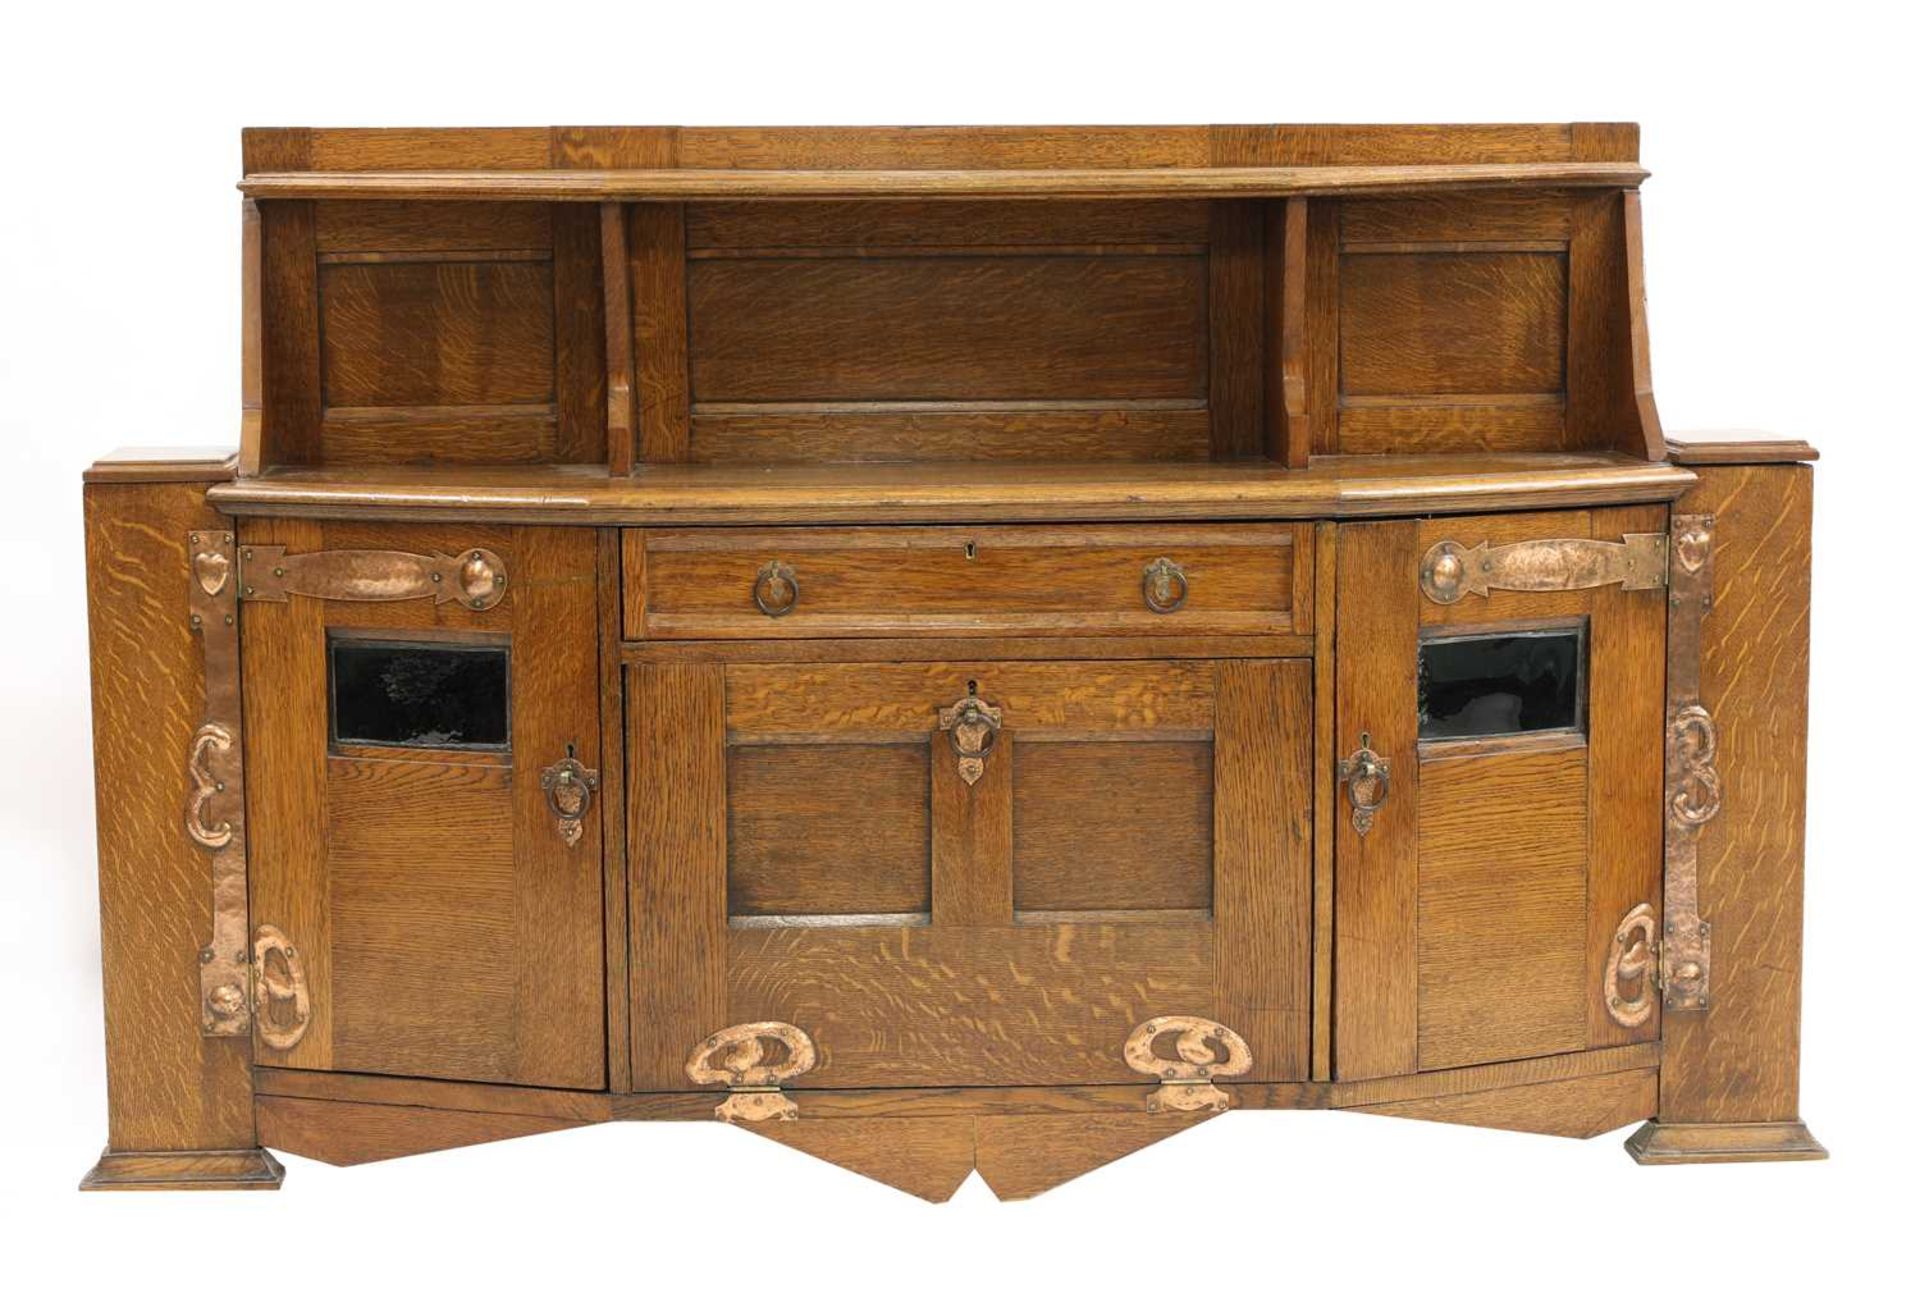 An Arts and Crafts oak cabinet,